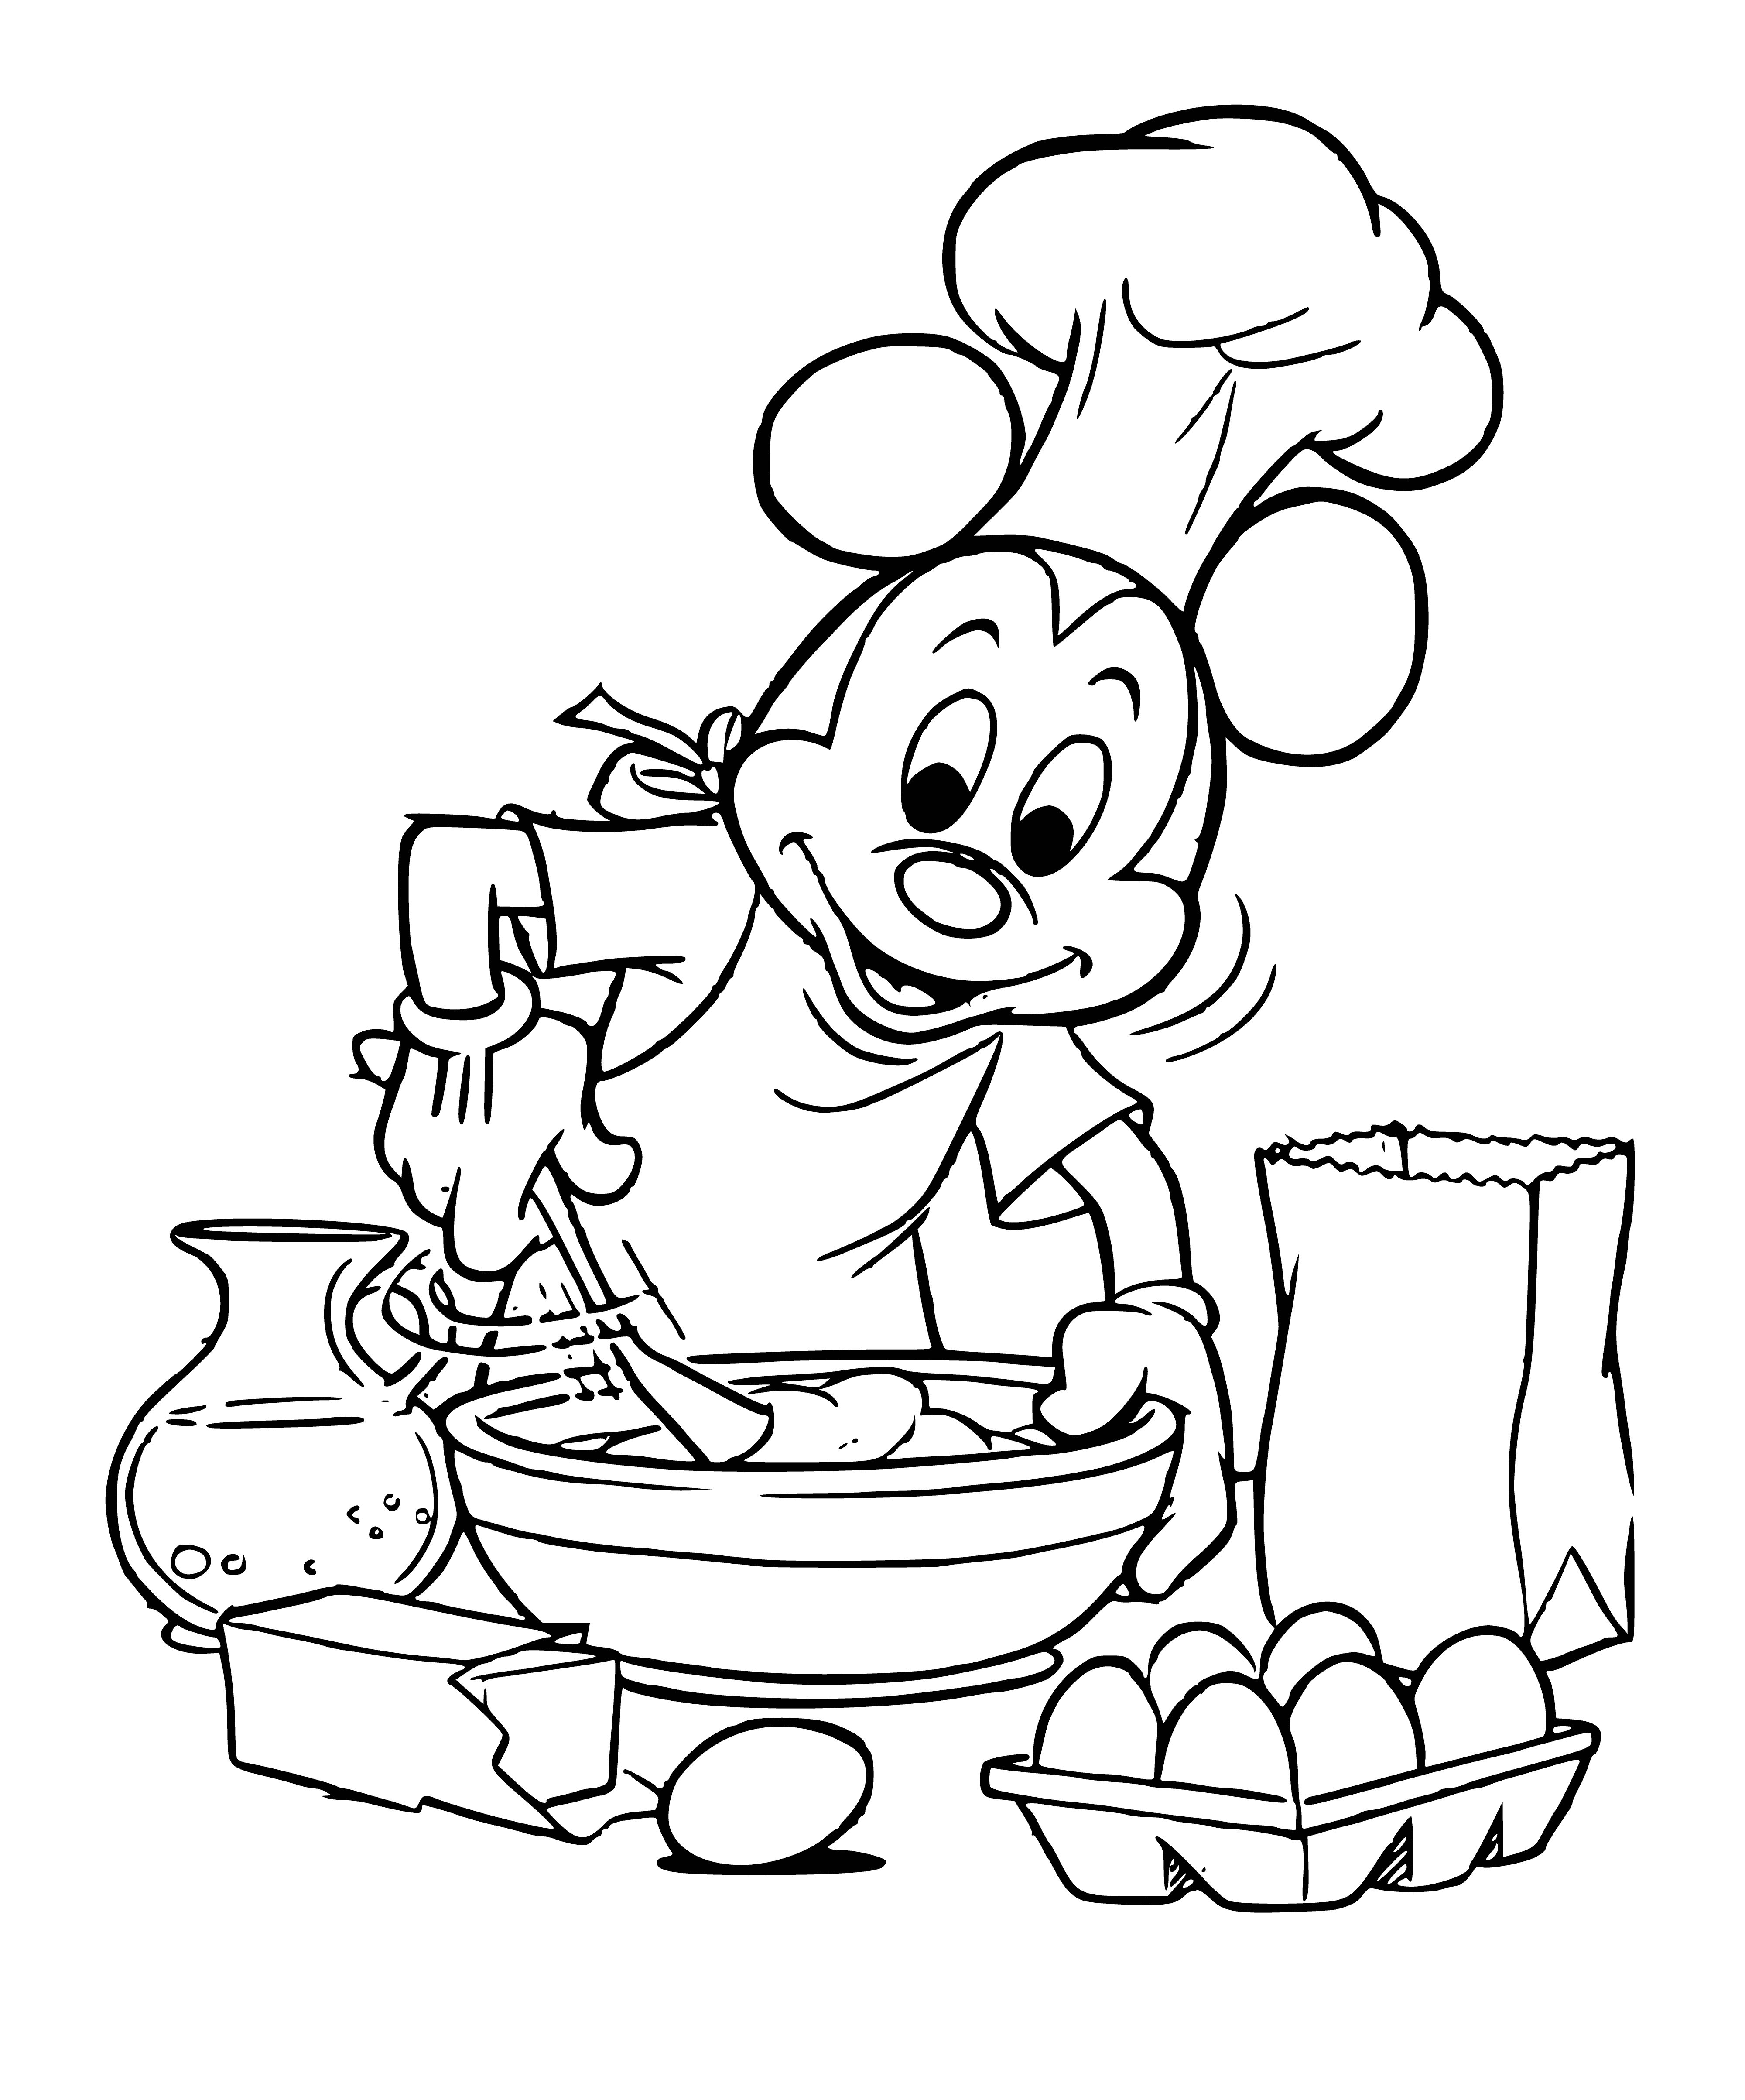 coloring page: Chef Mickey is all smiles in his red & white apron, holding a whisk and surrounded by cooking ingredients.